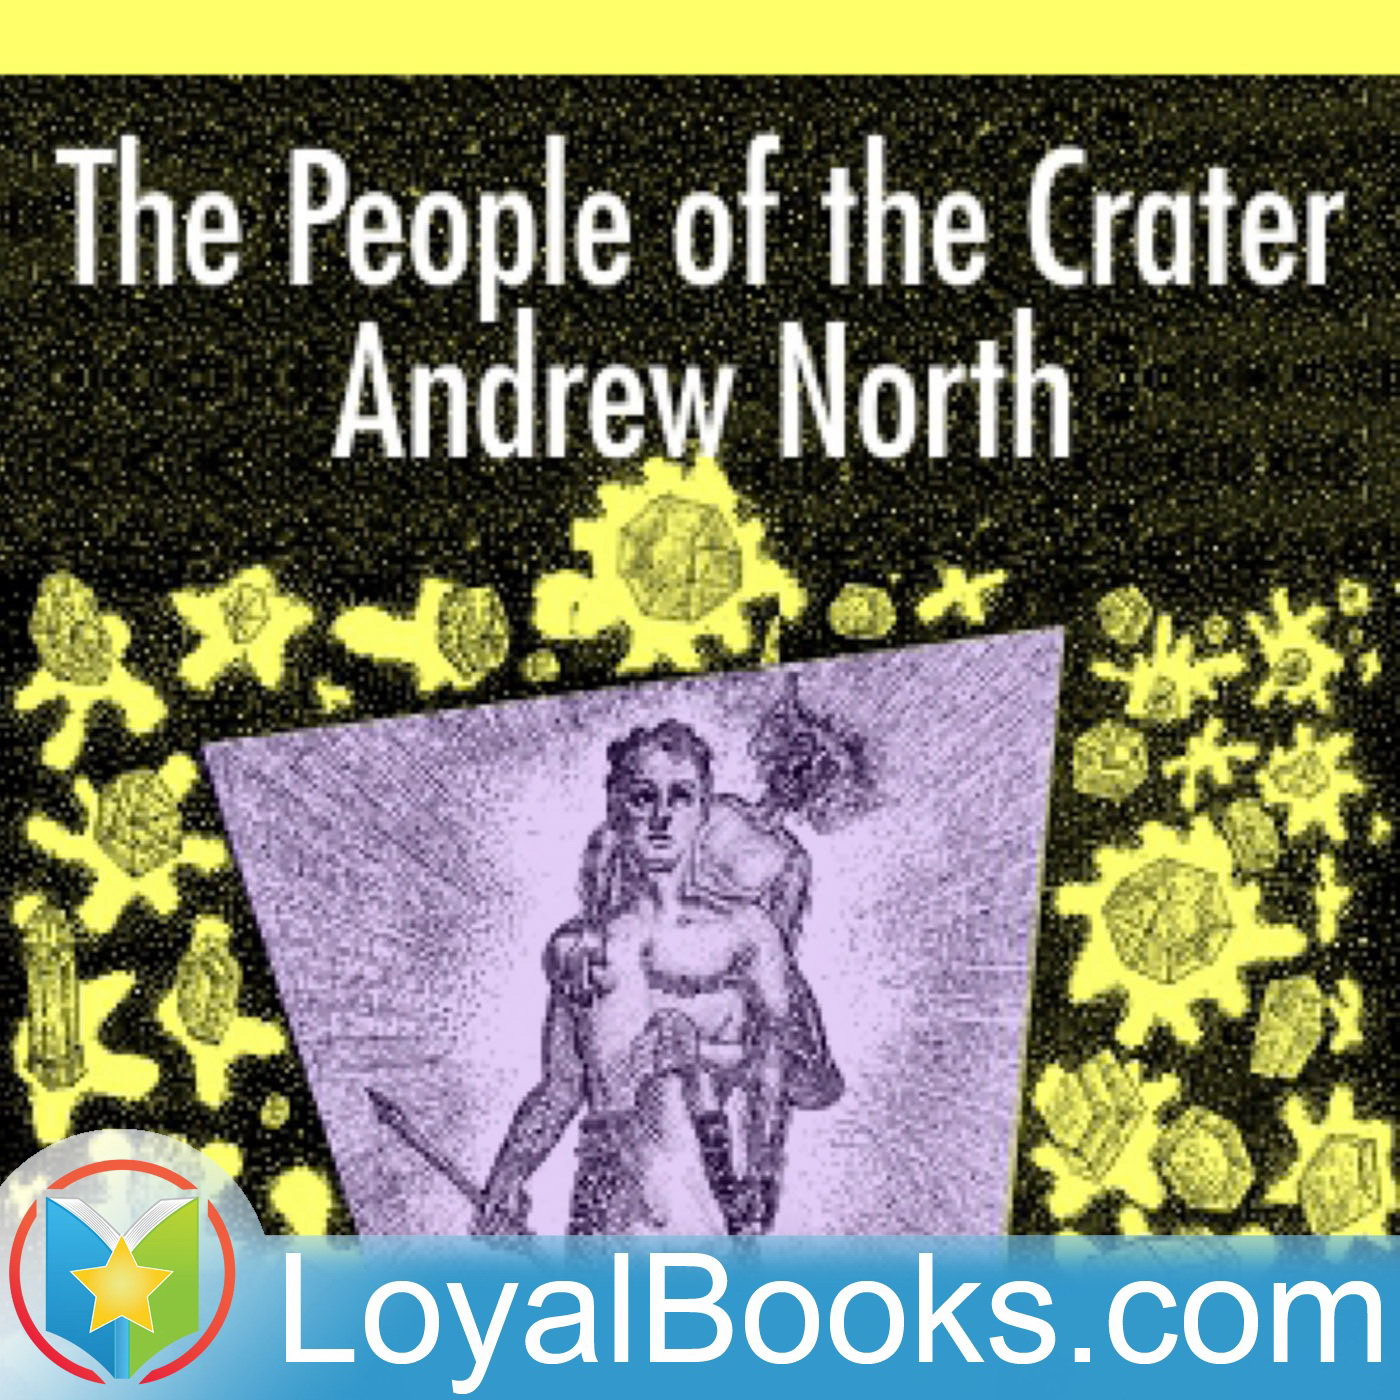 The People of the Crater by Andre Norton